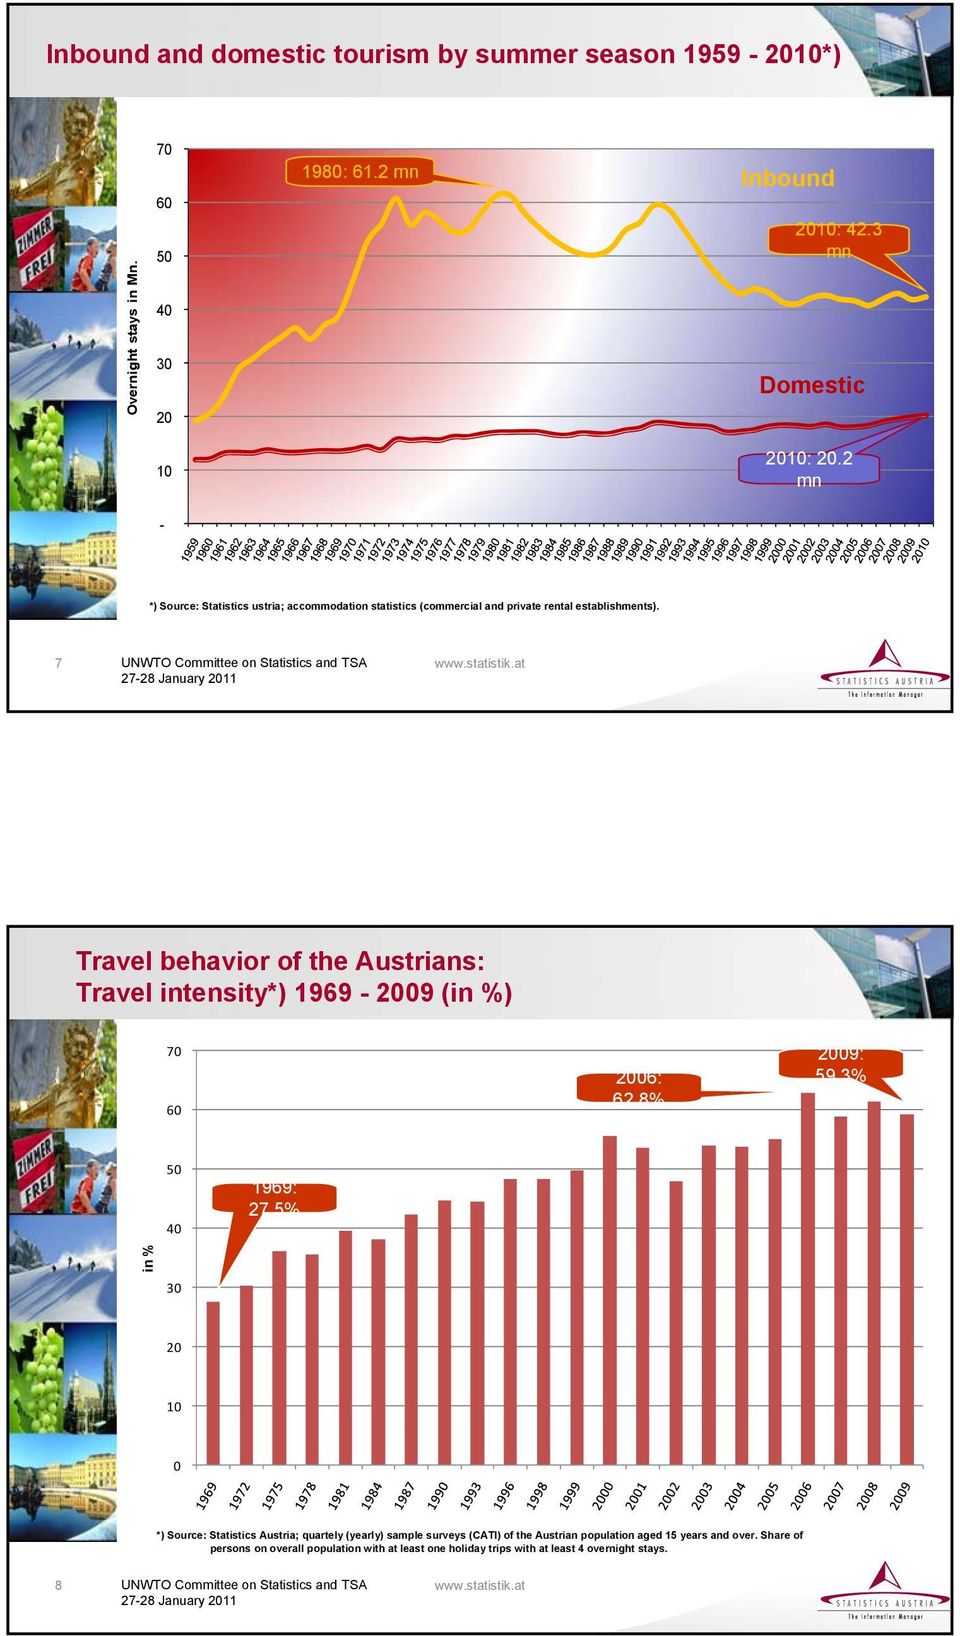 7 UNWTO Committee on Statistics and TSA Travel behavior of the Austrians: Travel intensity*) 1969-09 (in %) 70 06: 62.8% 09: 59.3% 1969: 27.